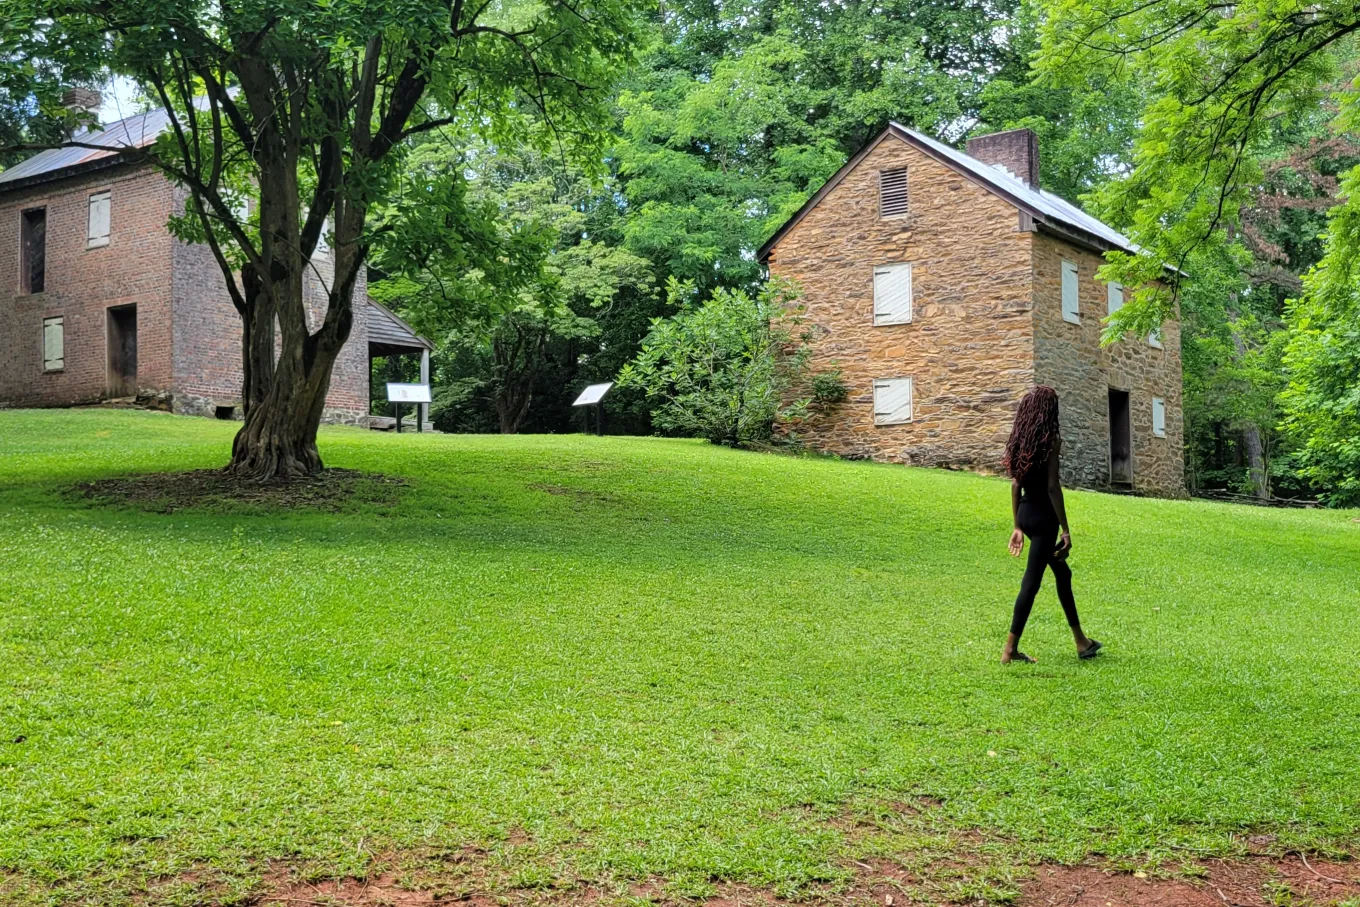 Cabins with walking person